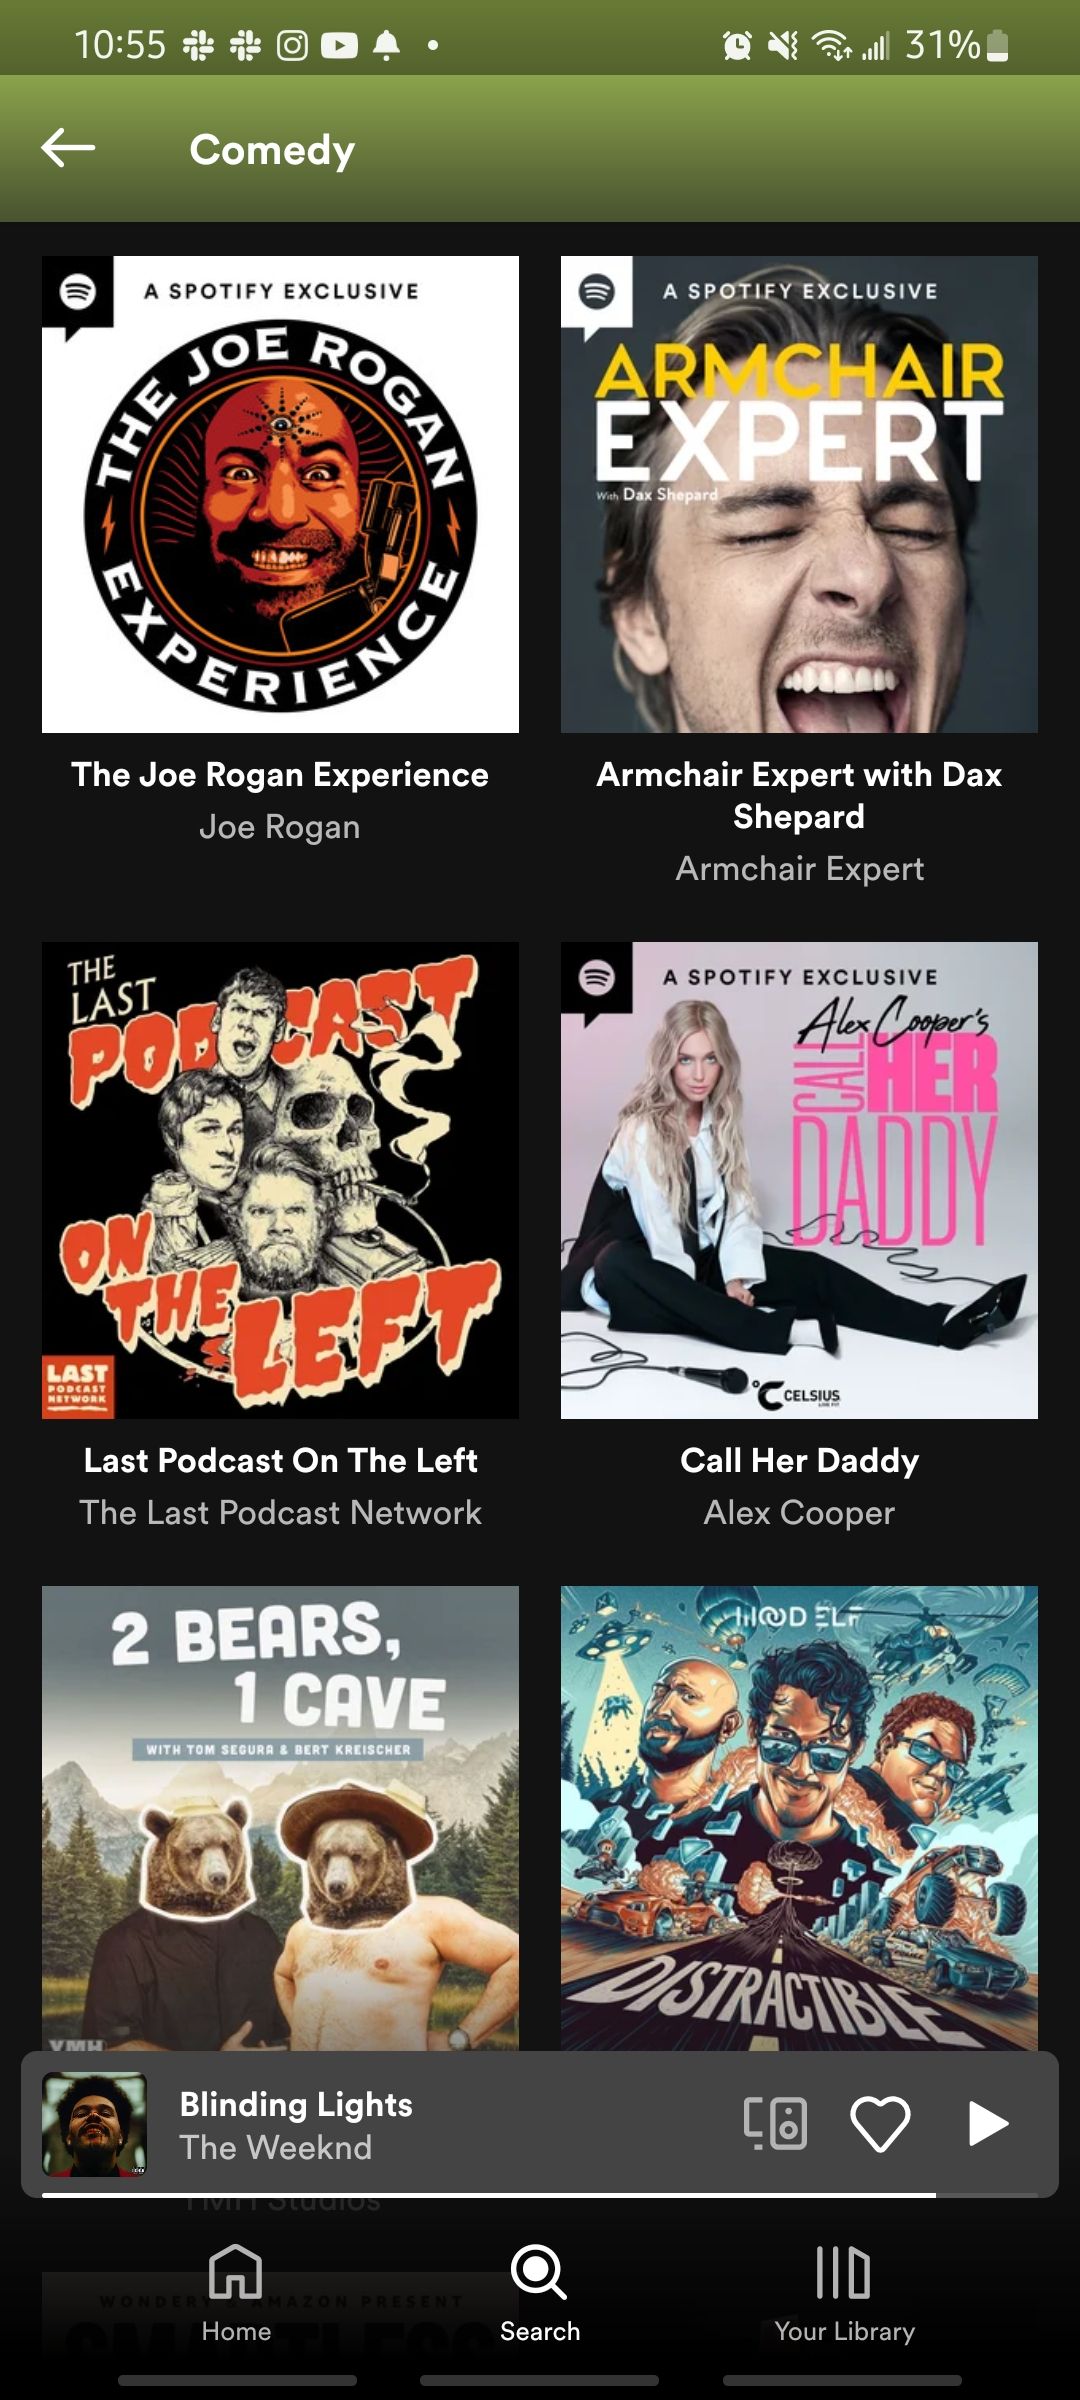 spotify app showing various comedy podcasts